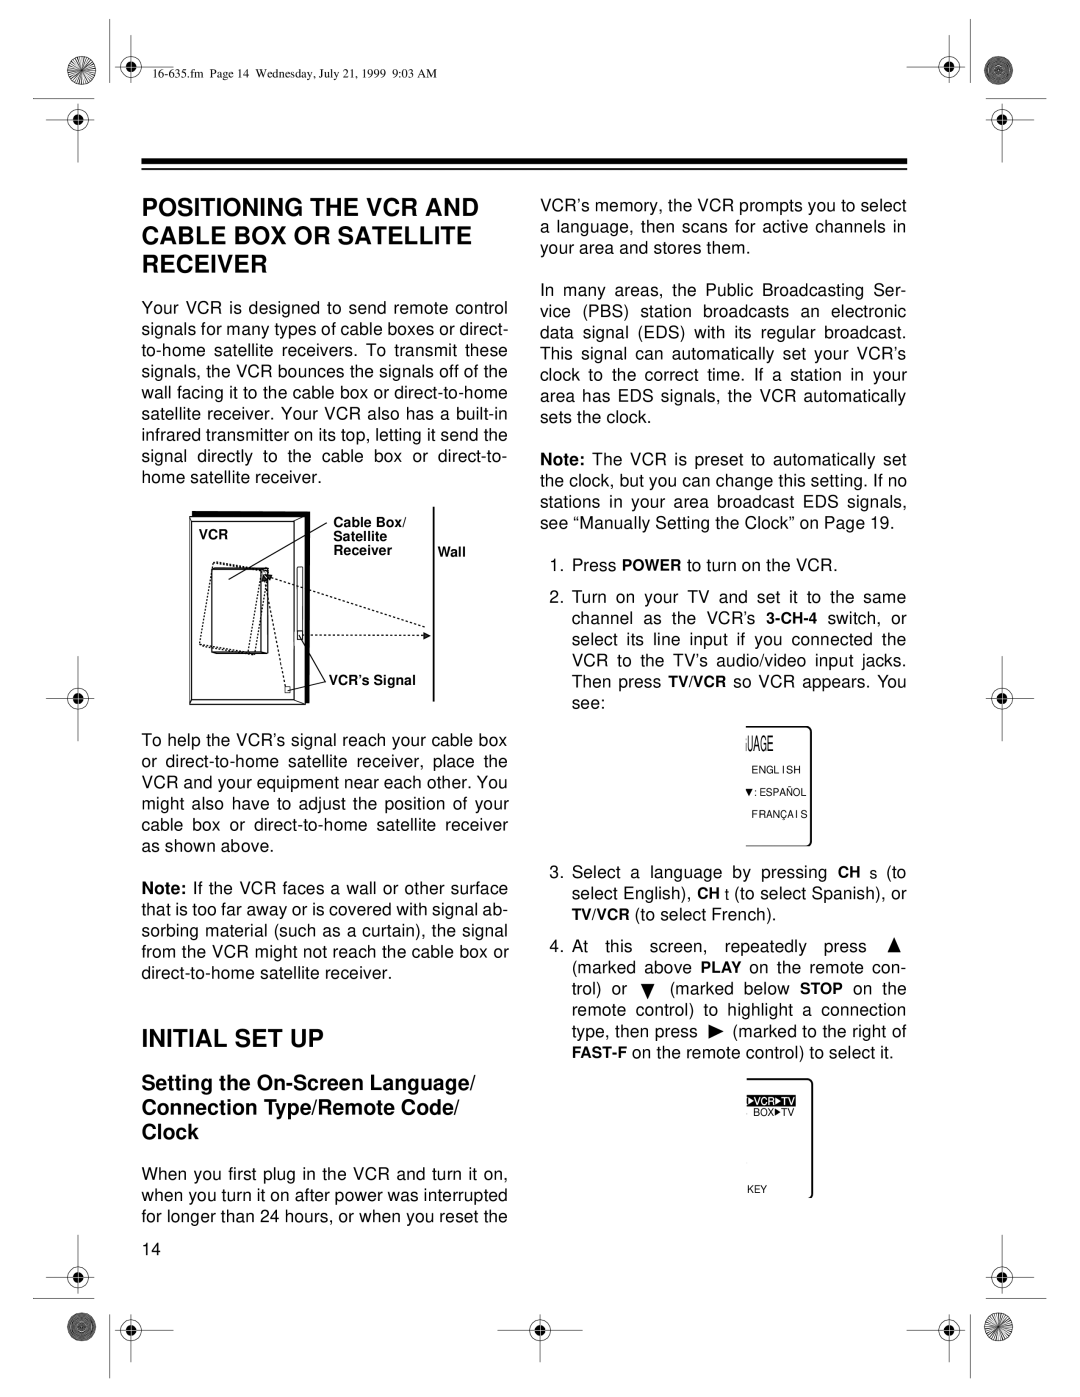 Radio Shack 66 owner manual Positioning The Vcr And Cable Box Or Satellite Receiver, Initial Set Up, Guage 